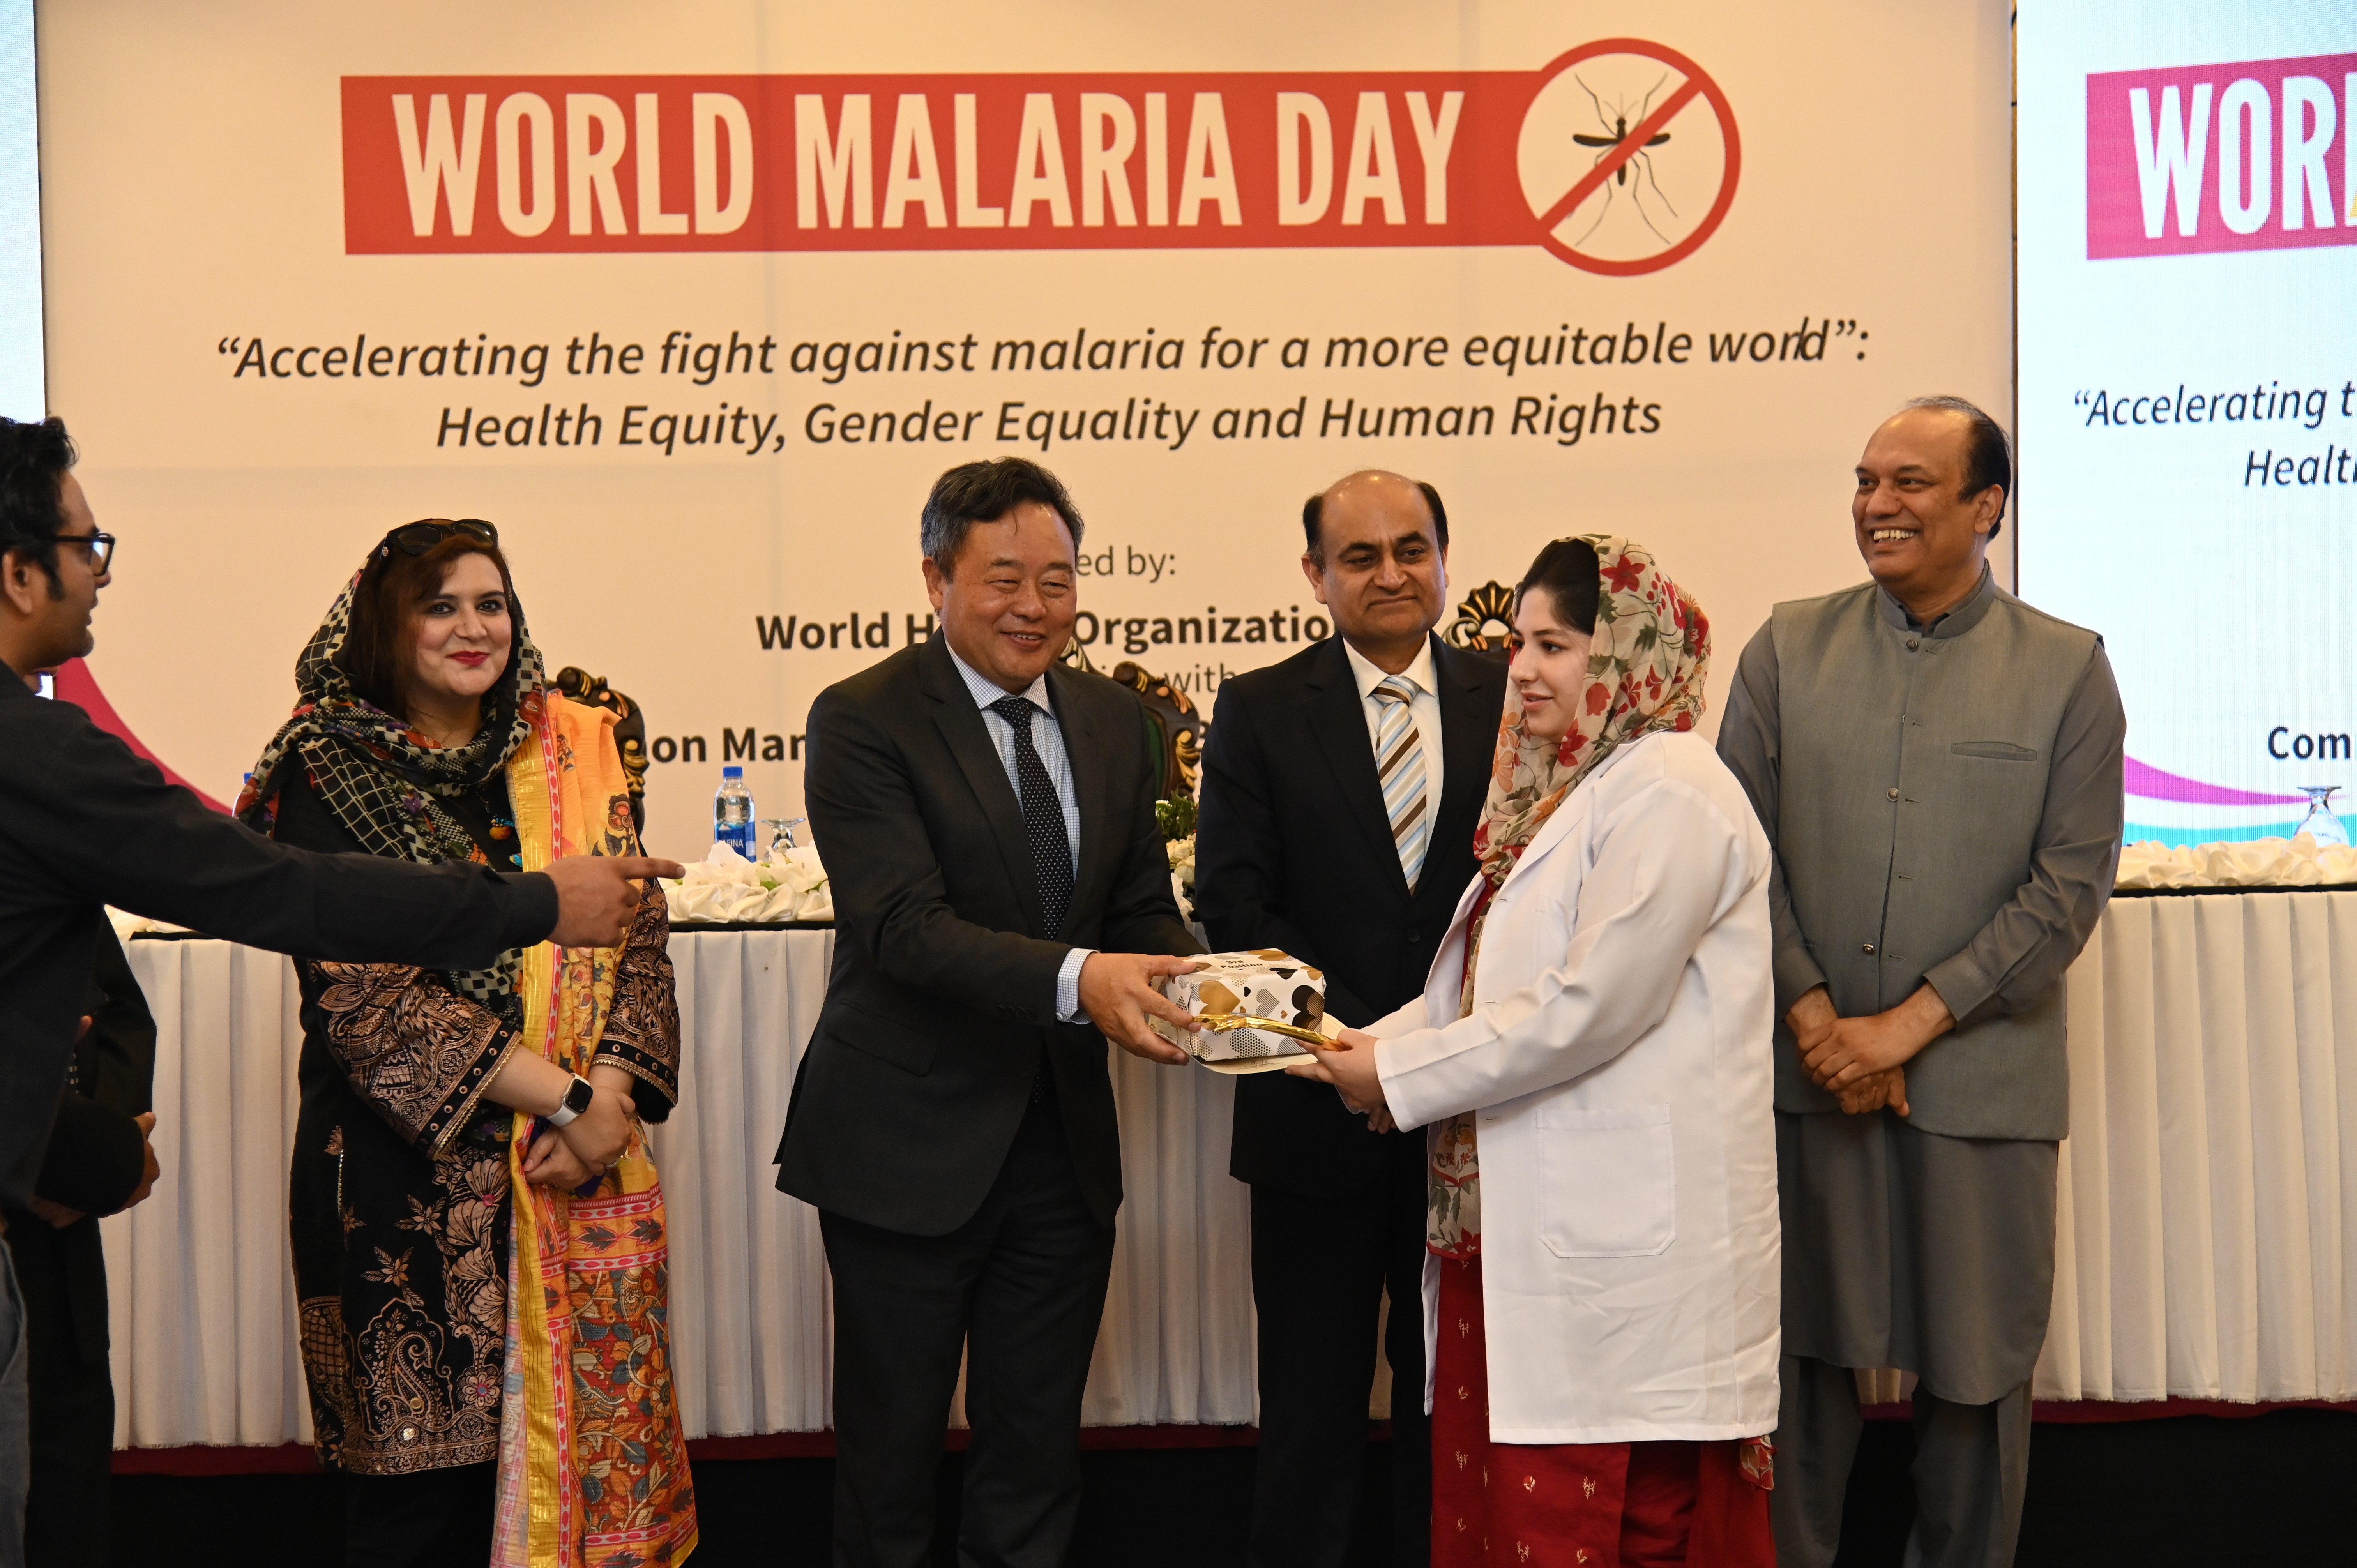 The prize distribution at the event of World Malaria Day 2024